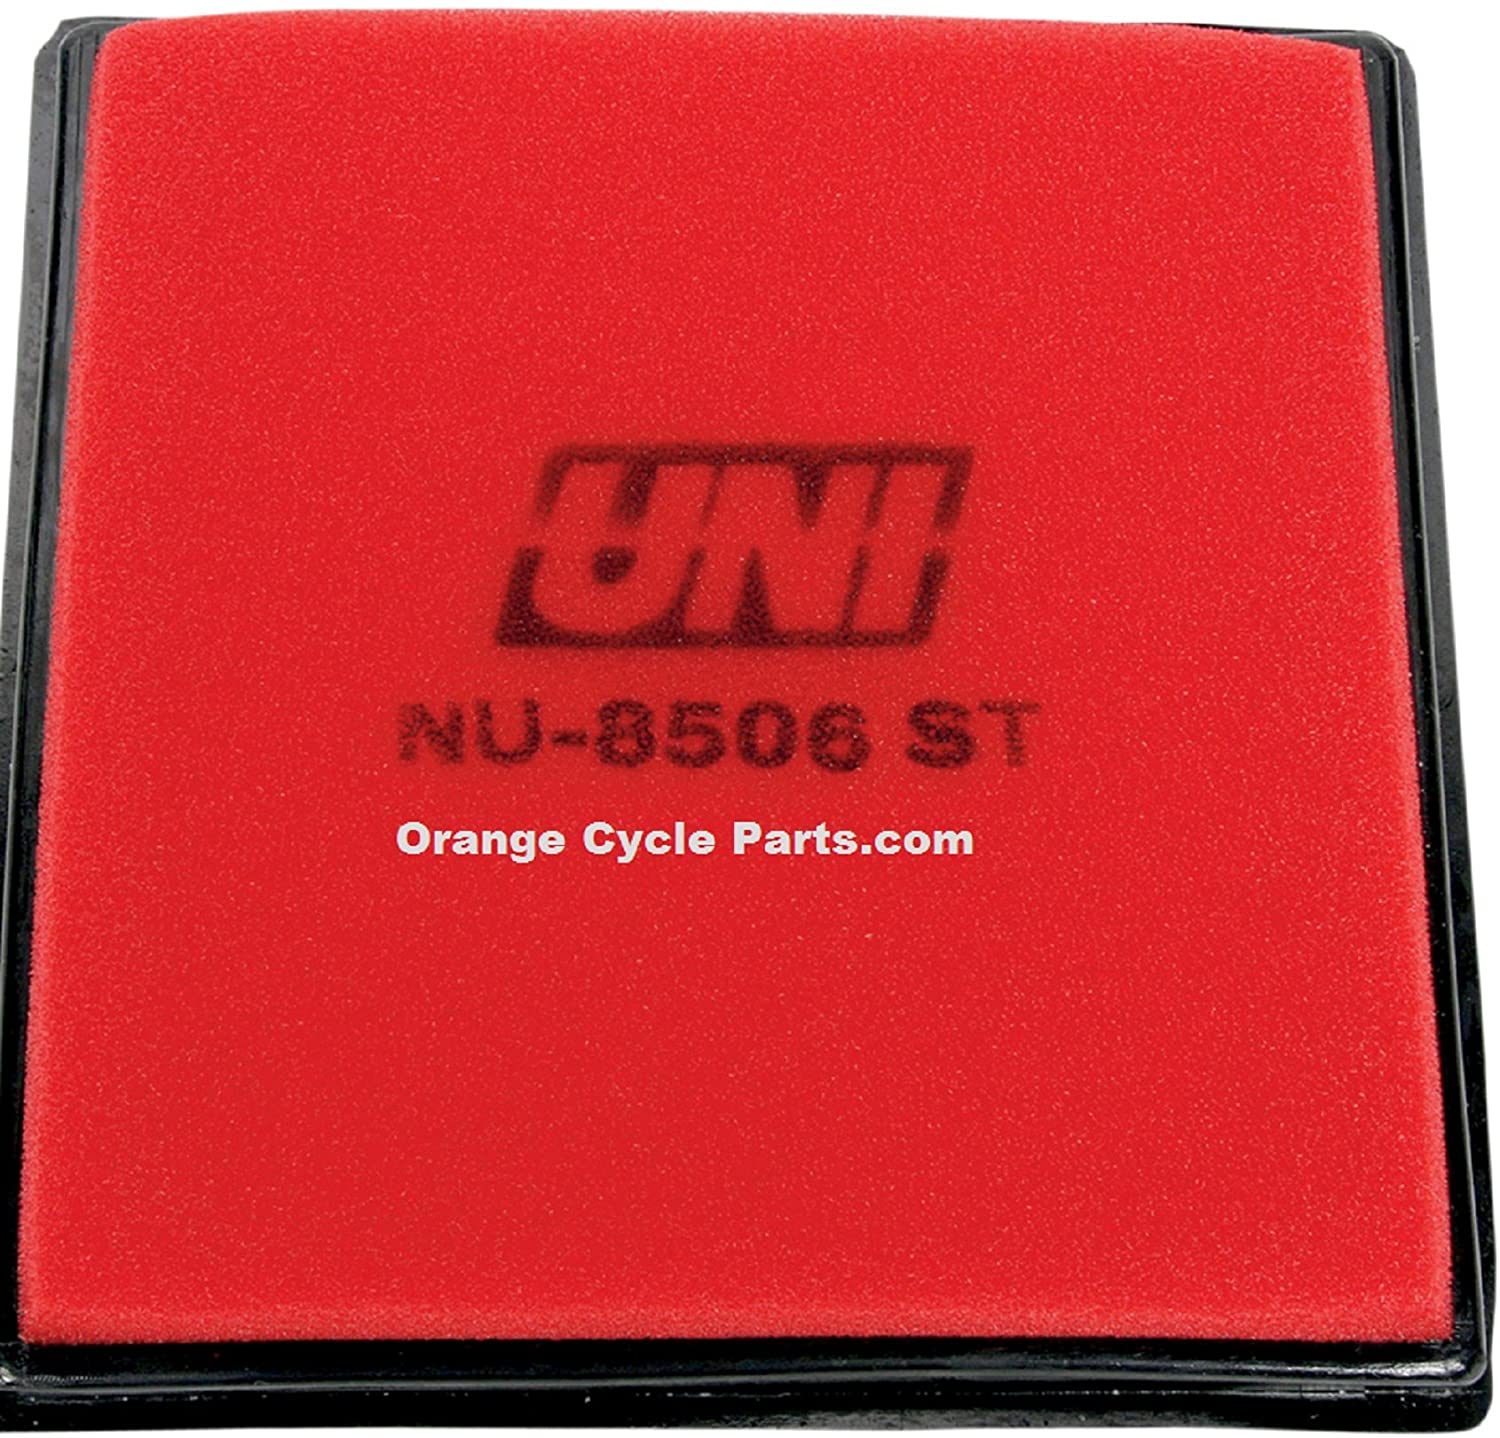 Uni nu-8506st multi-stage competition air fi lter (NU-8506ST)